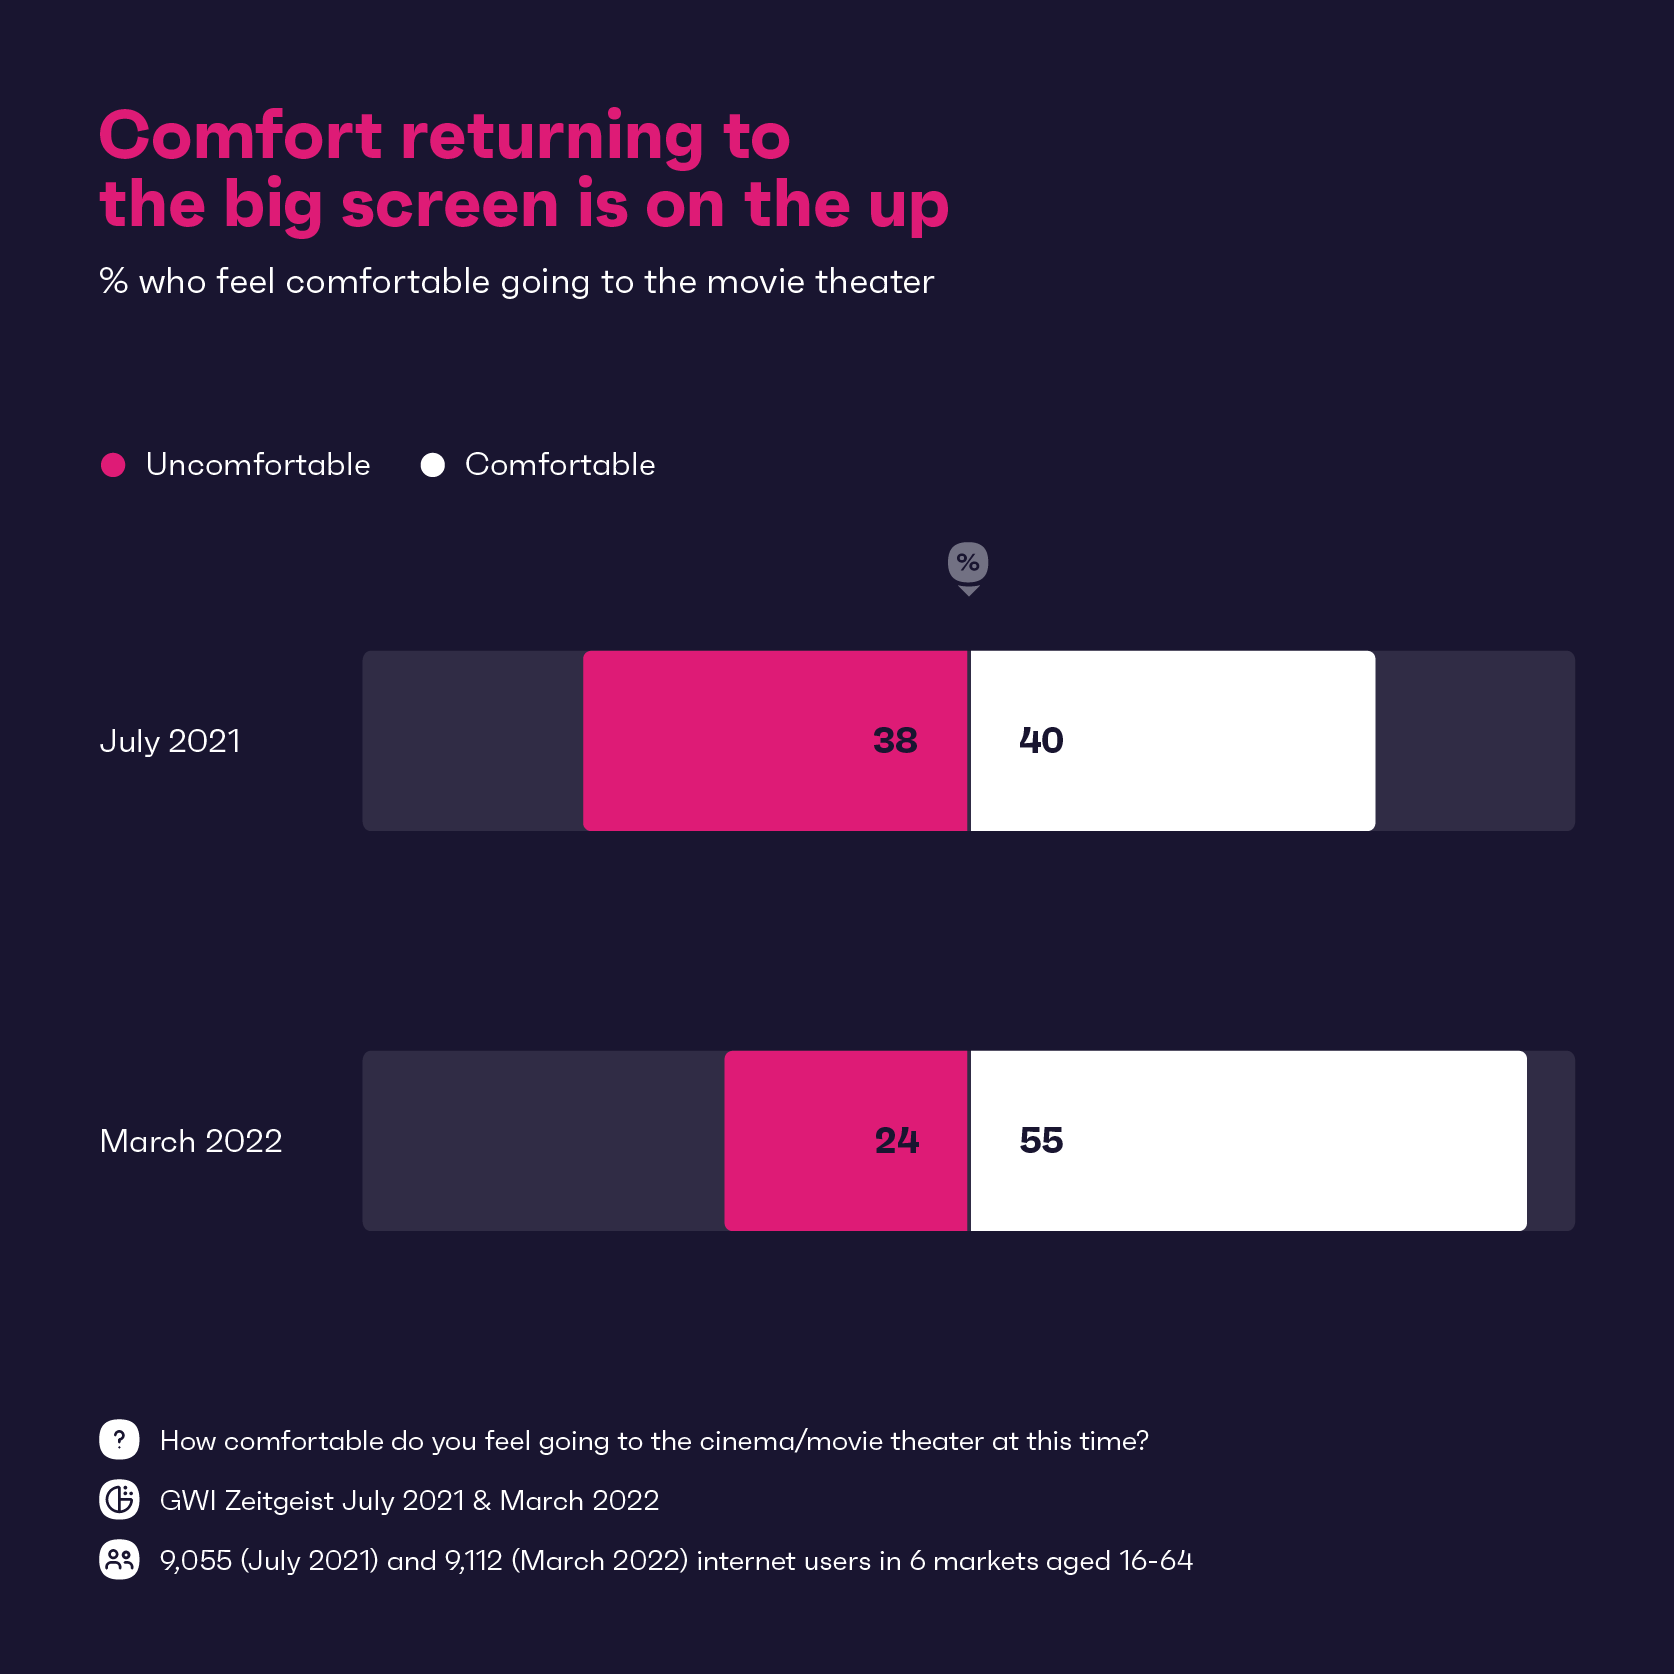 Chart showing the change in comfort levels in going to the cinema